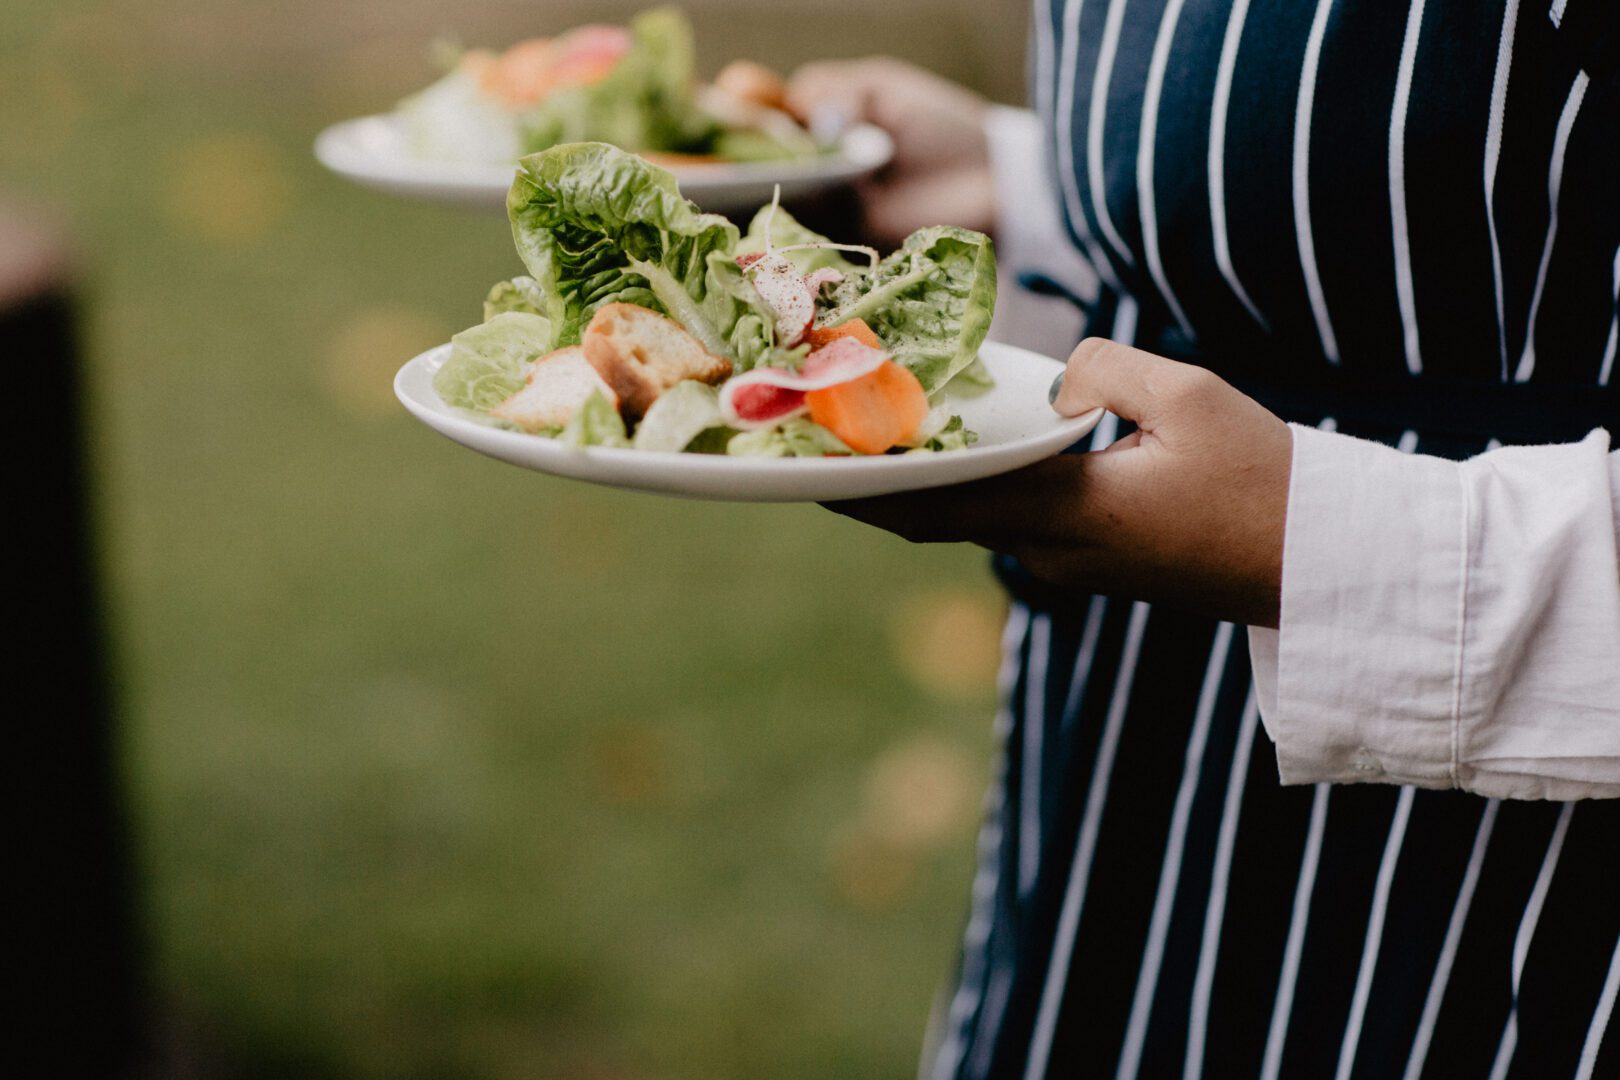 A woman is holding a plate of salad.